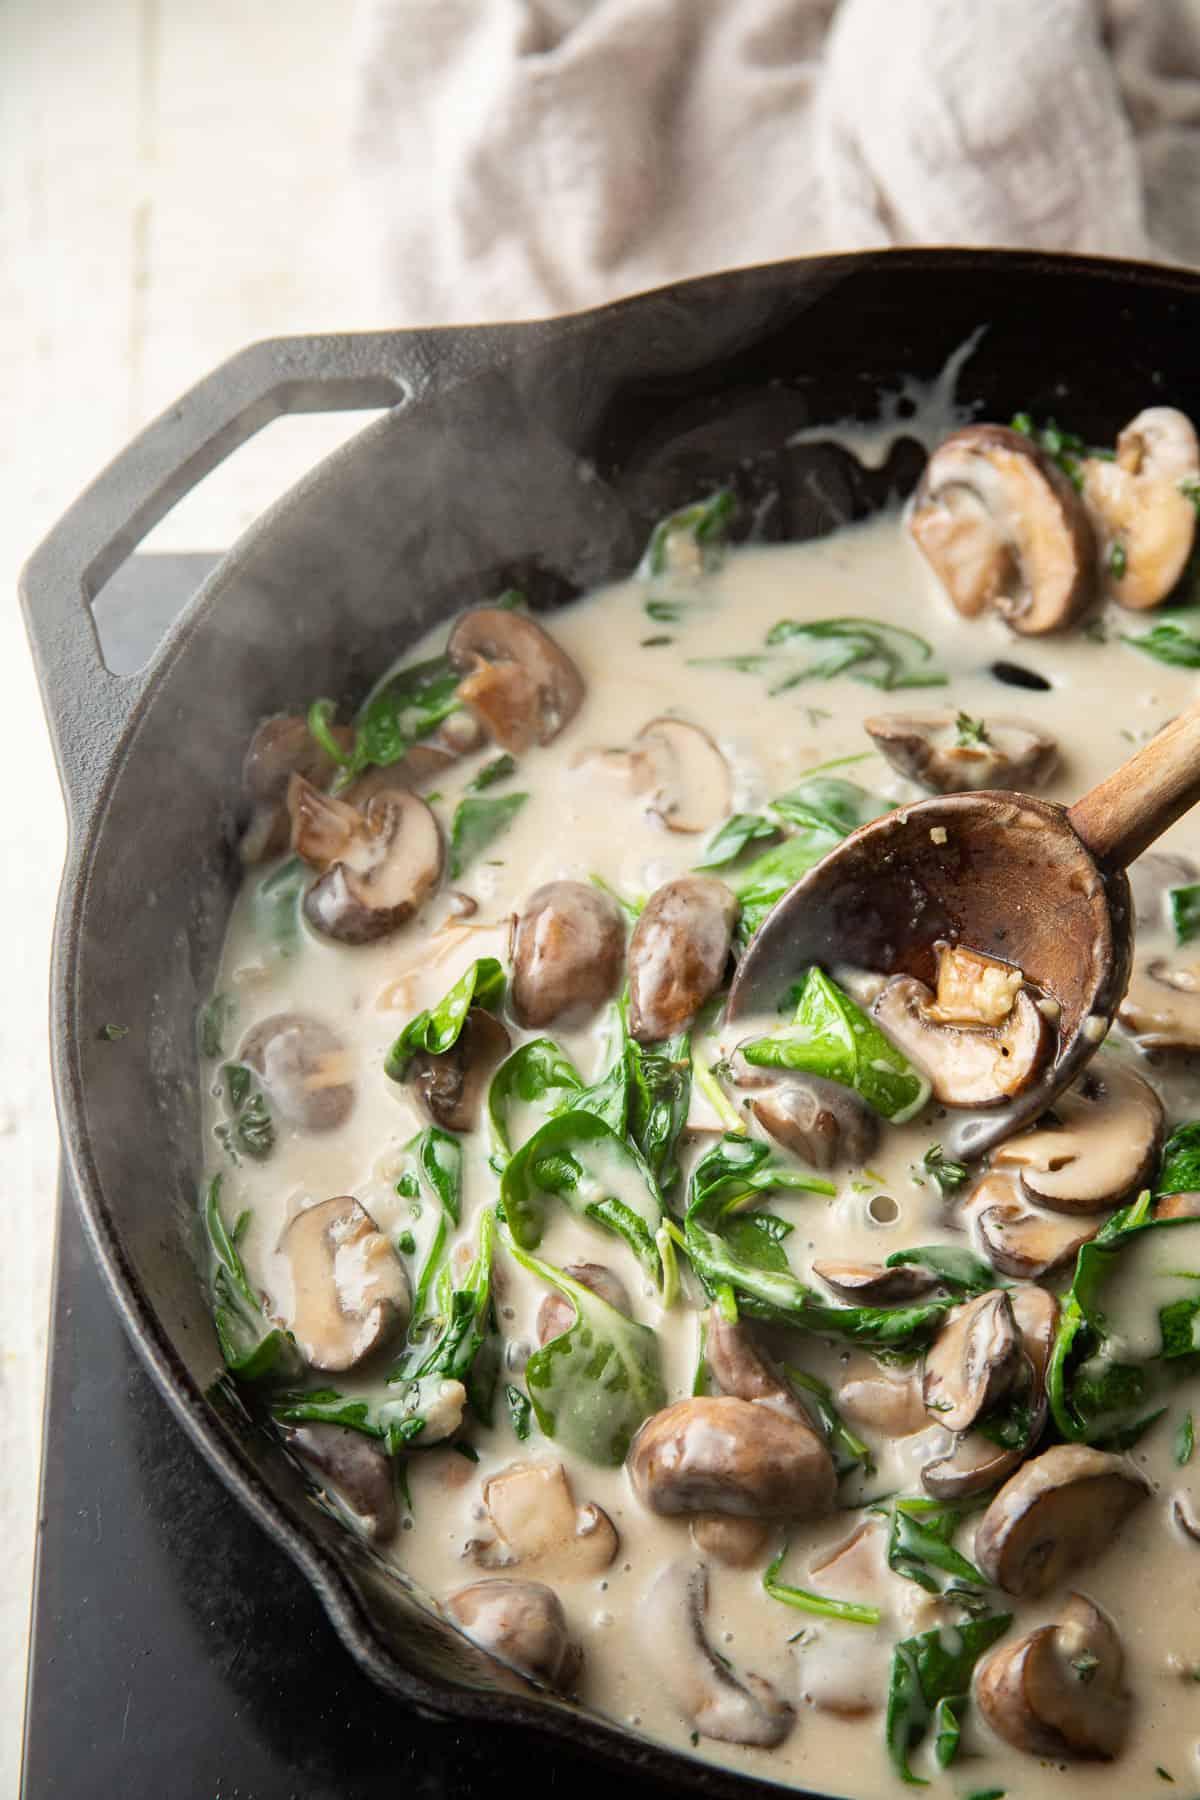 Mushroom and spinach cooking in creamy sauce in a skillet.